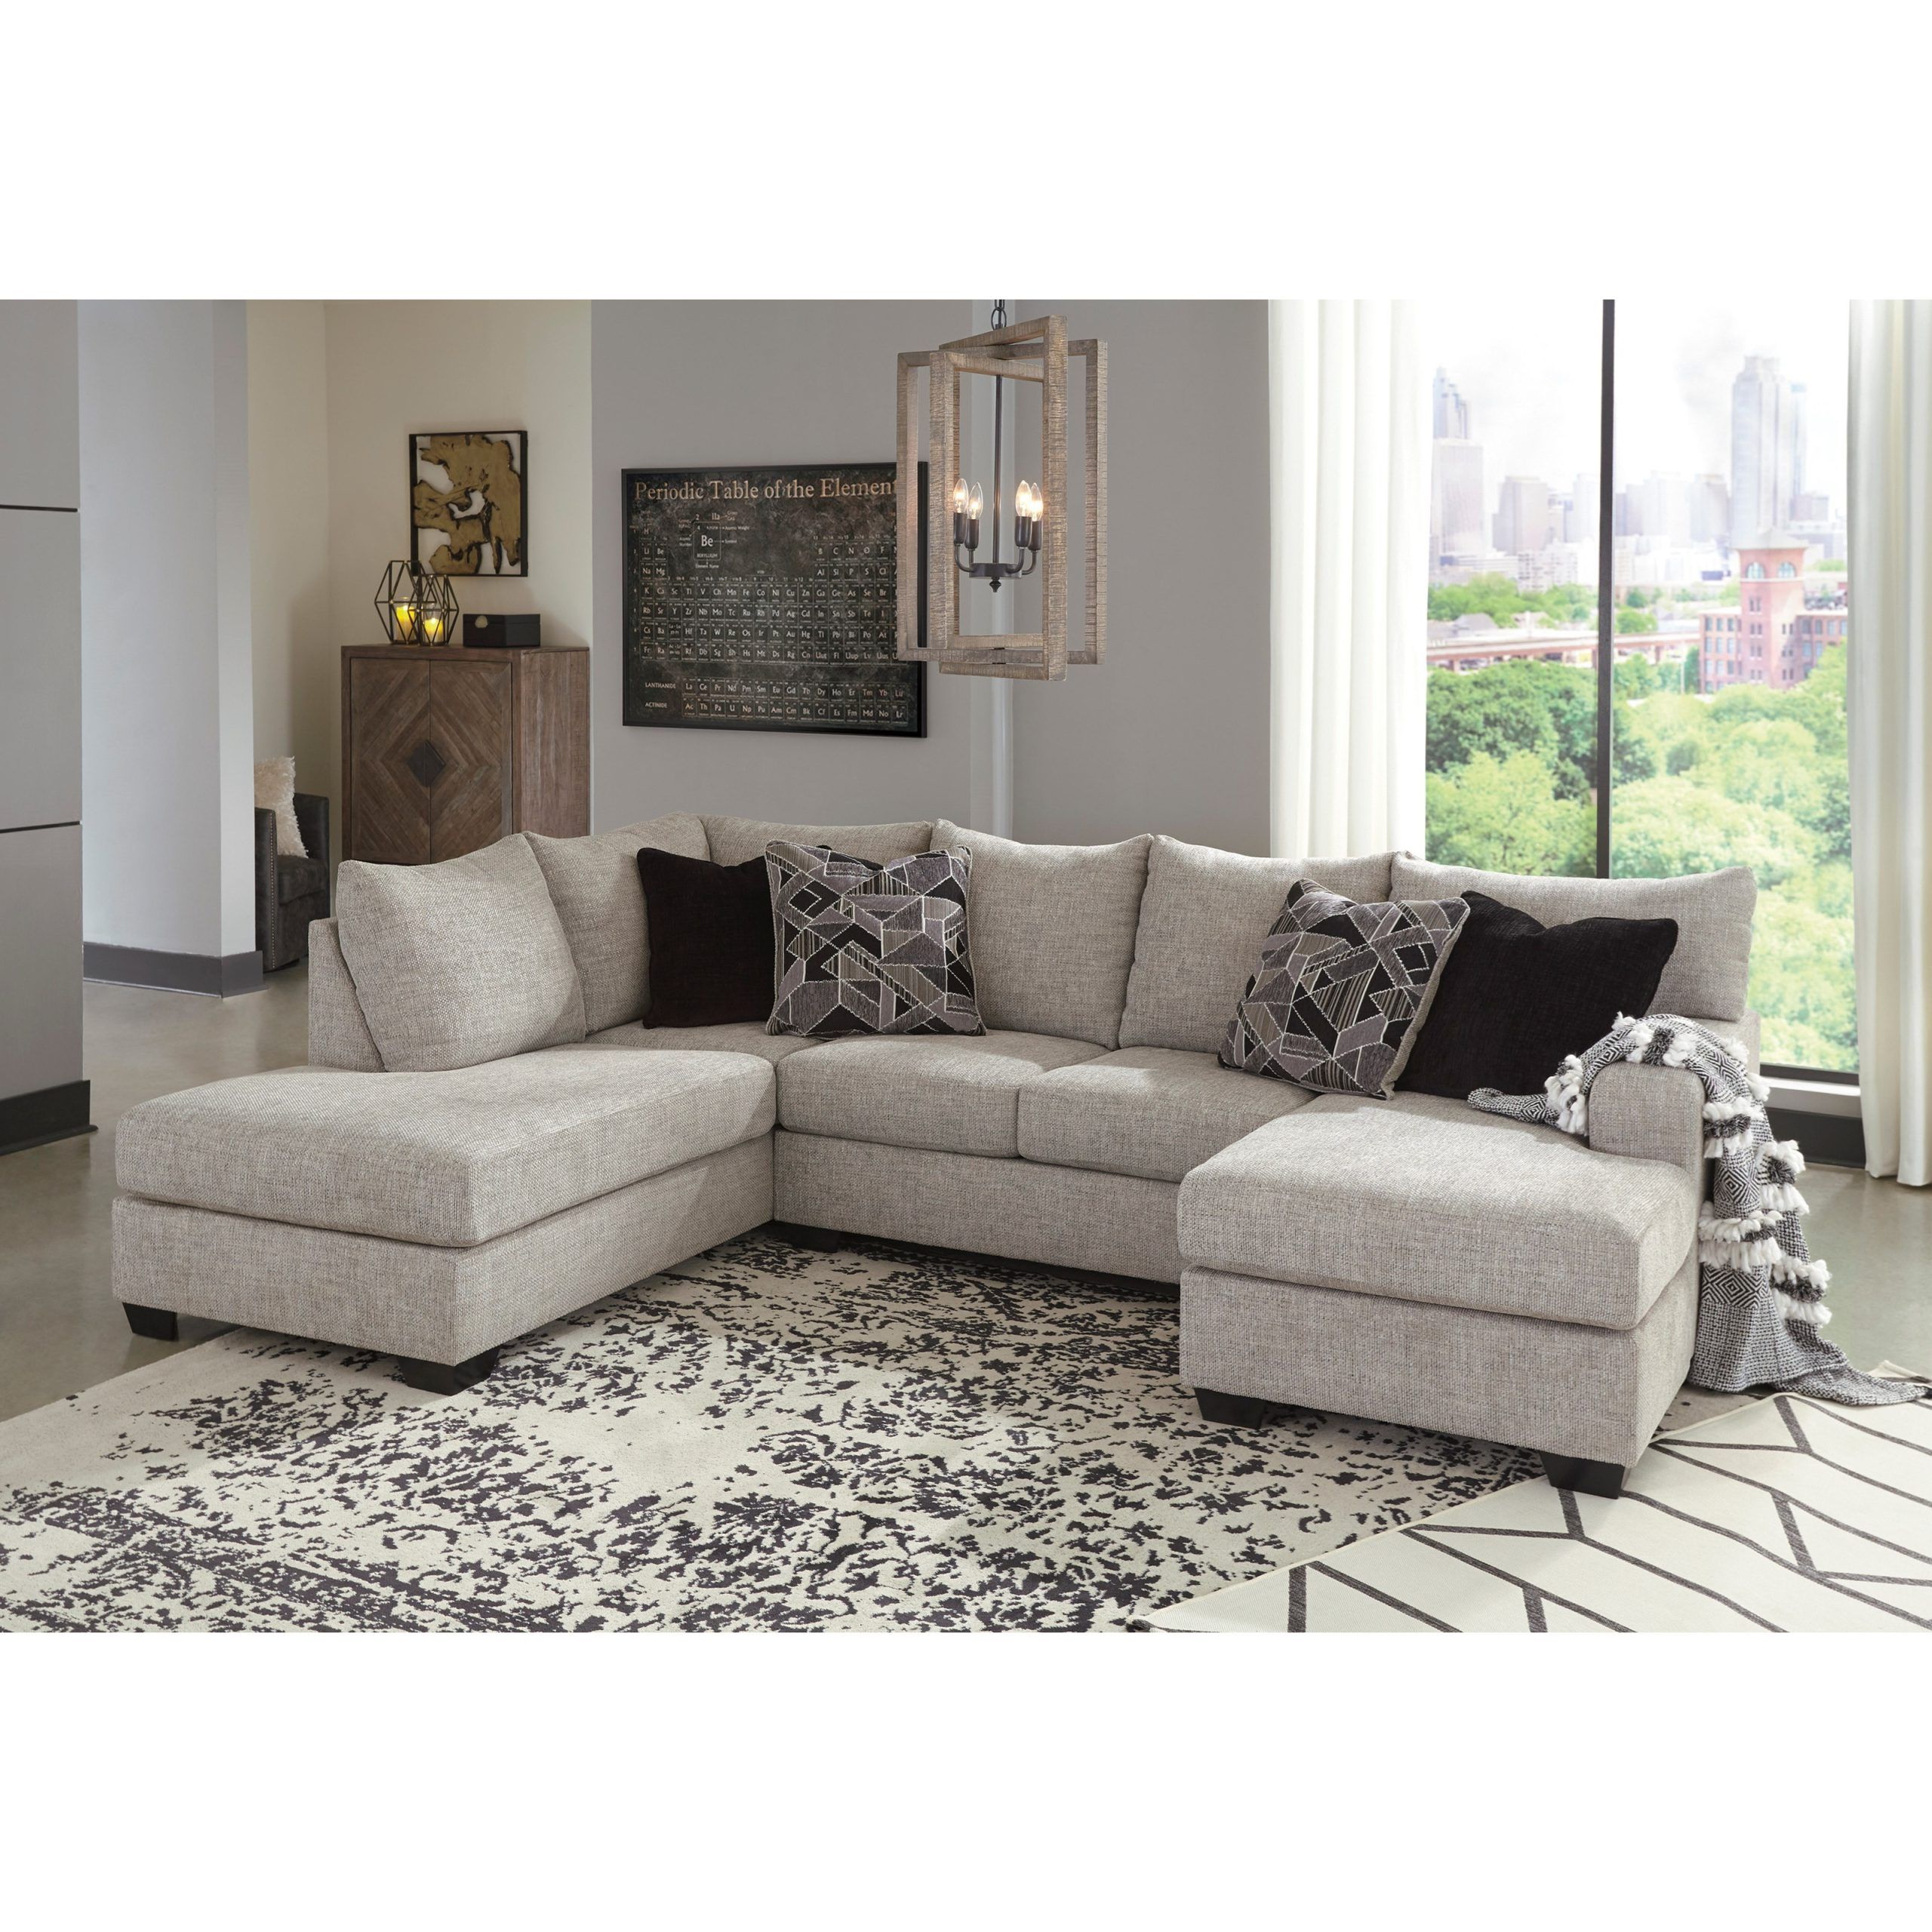 U Shaped Sectional With Two Chaises | Sadler's Home Furnishings Within Modern U Shape Sectional Sofas In Gray (Gallery 19 of 20)